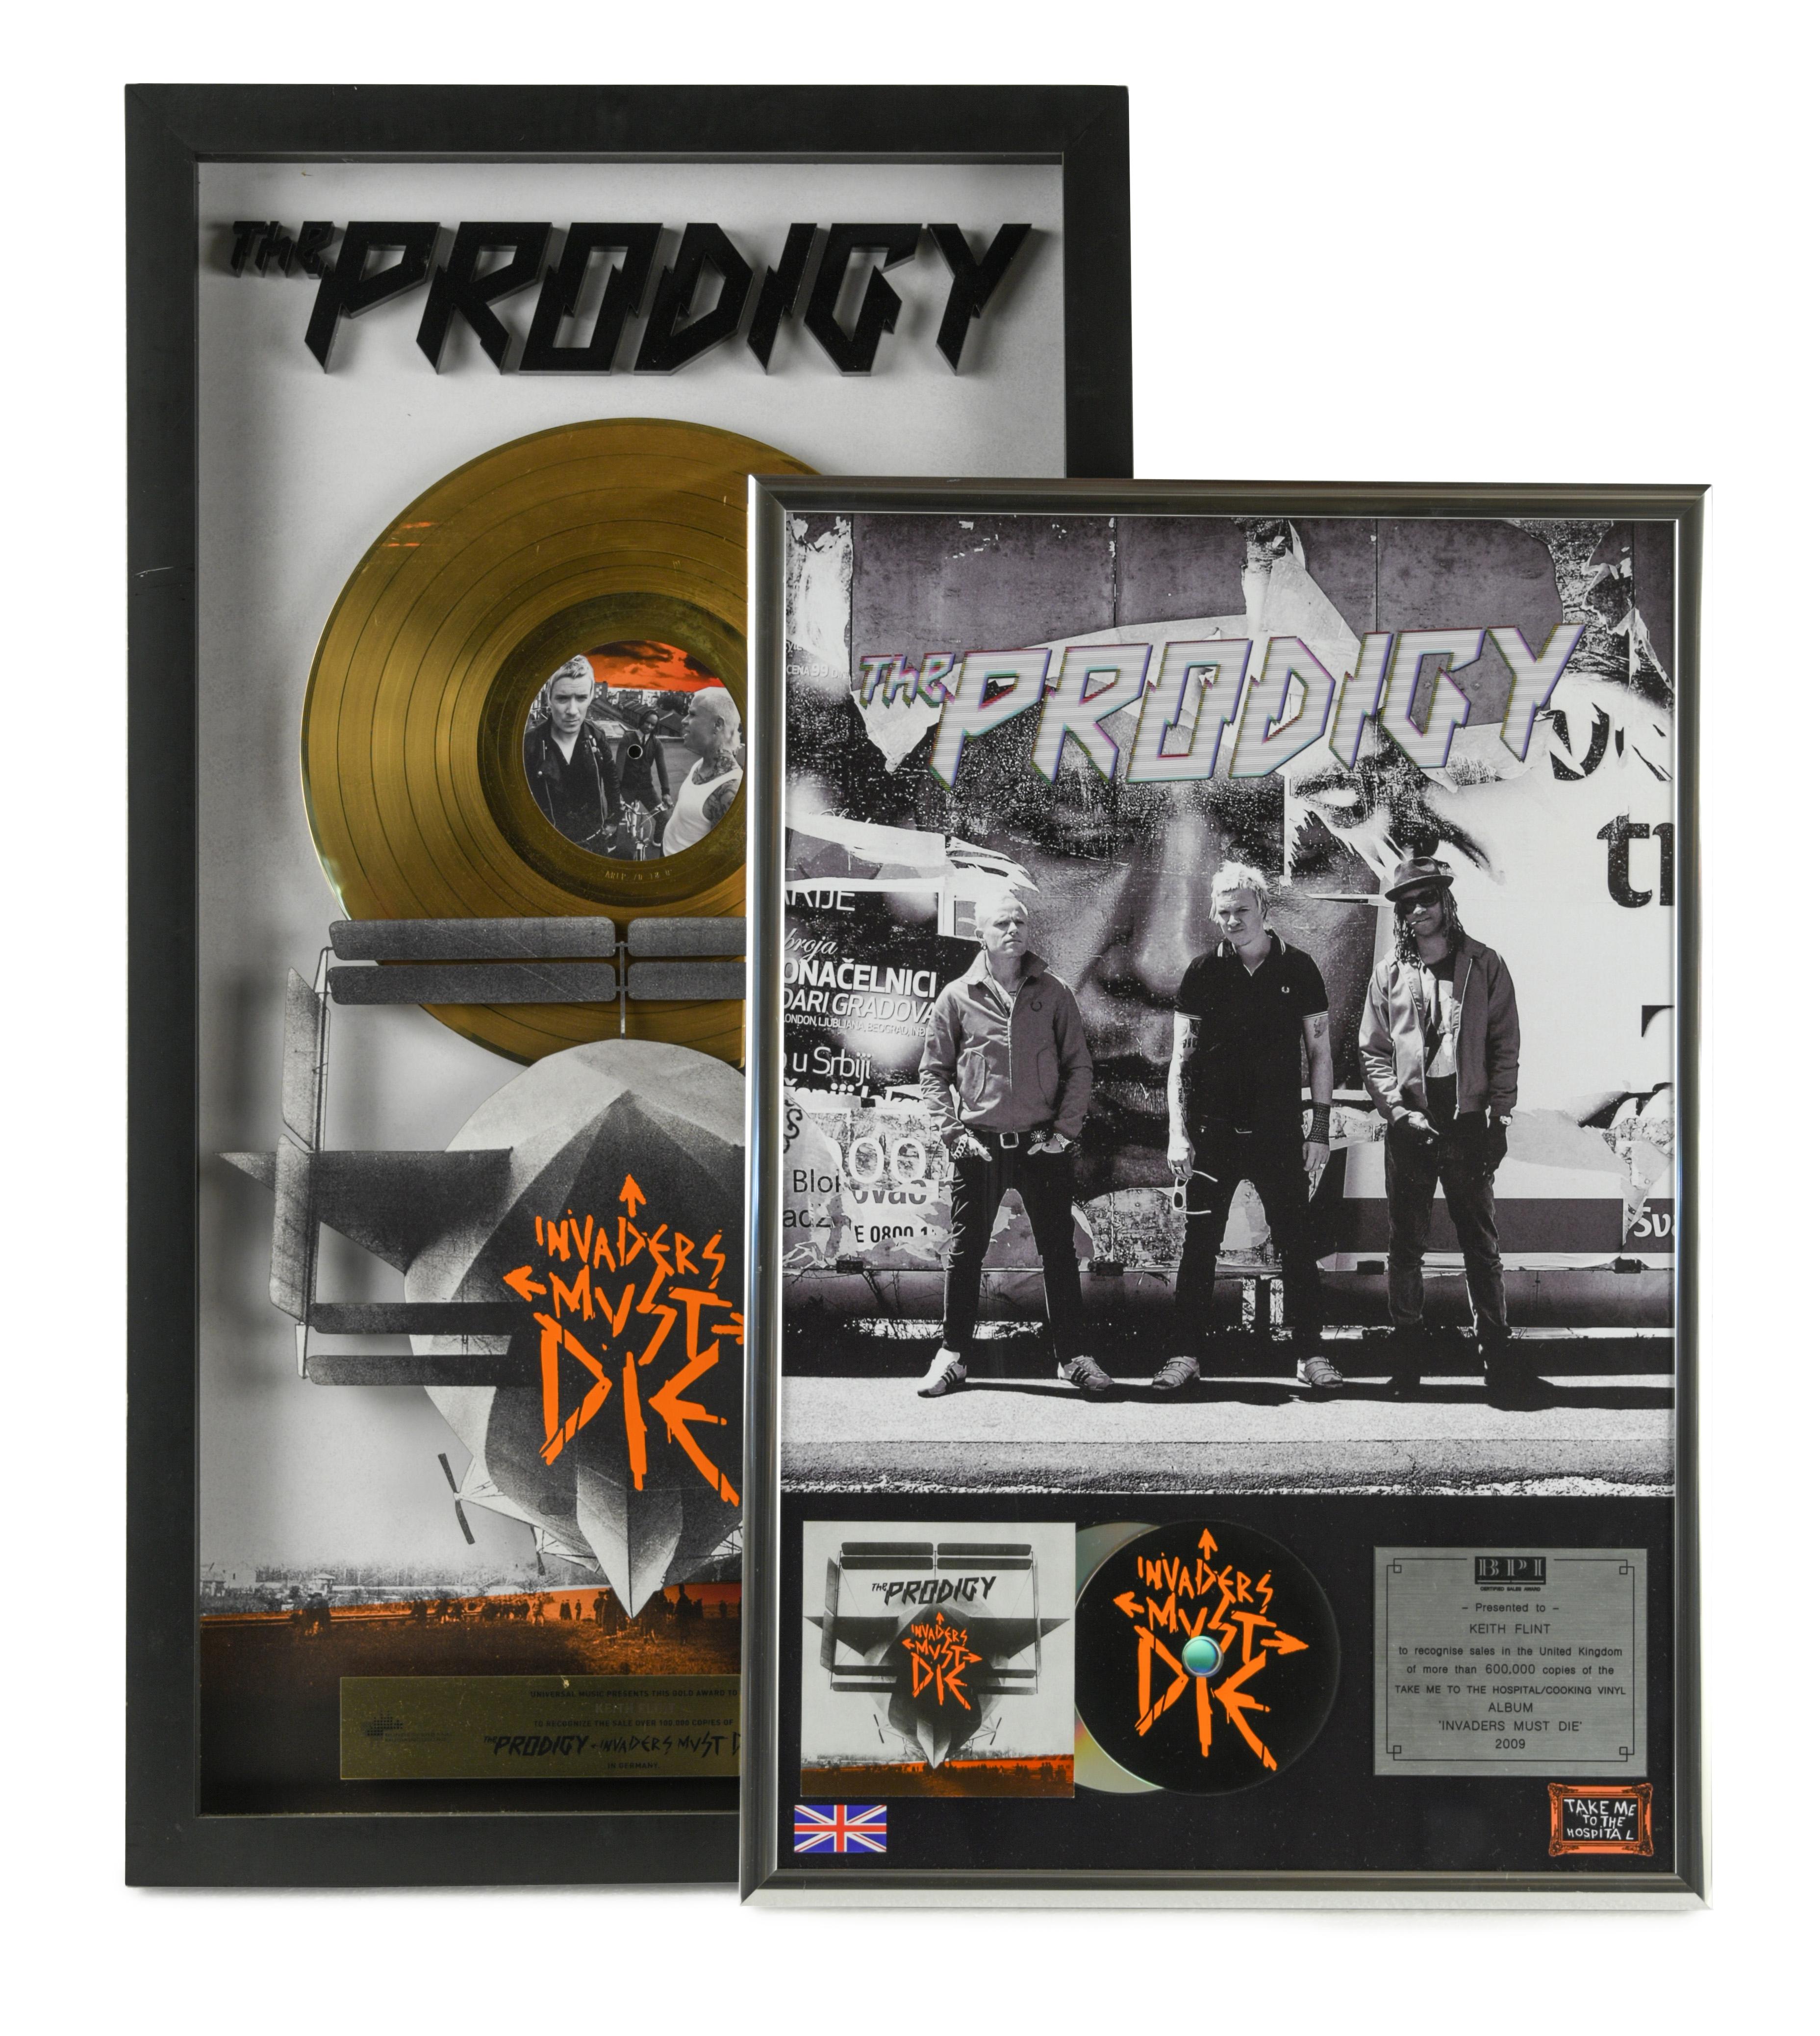 Invaders Must Die' 2009 a presentation gold disc to Keith Flint, to recognise sales in Germany of